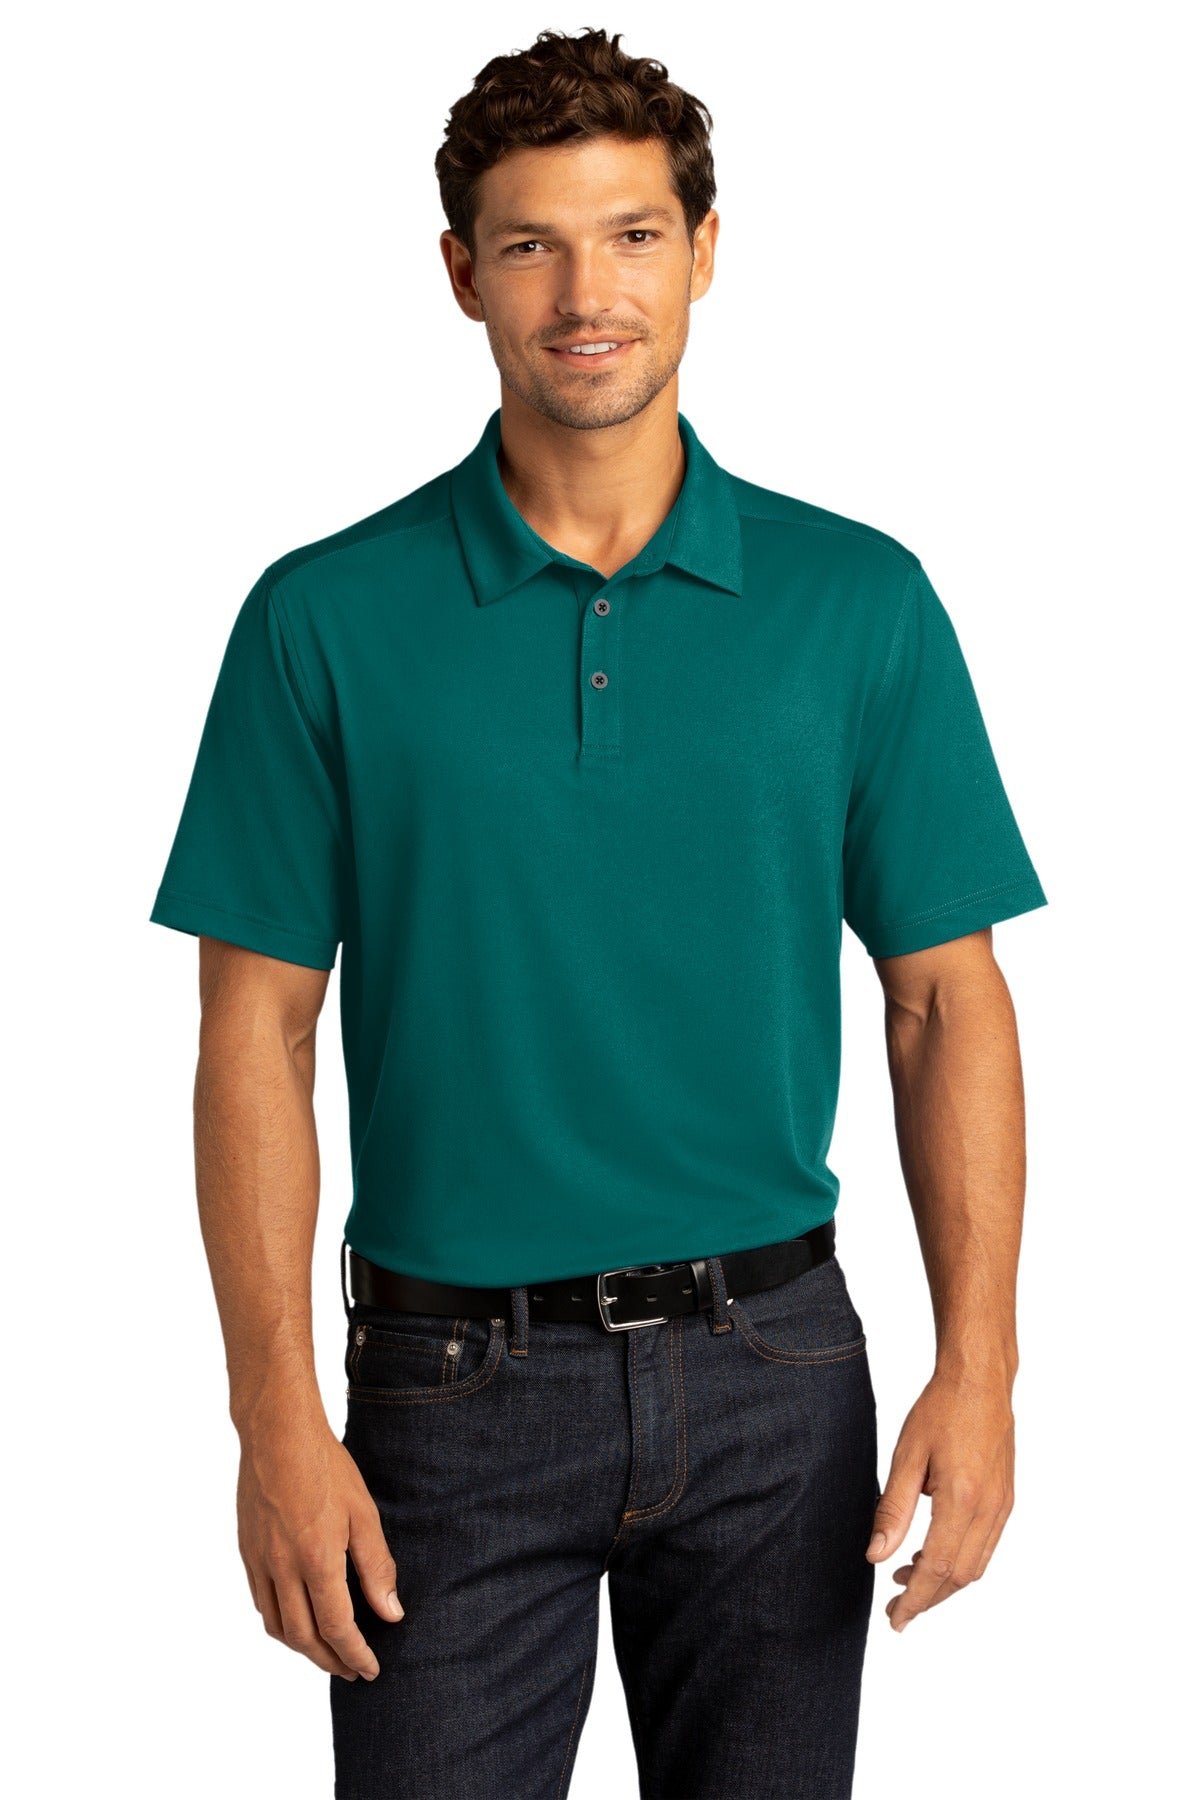 Polos/Knits Dark Teal Port Authority